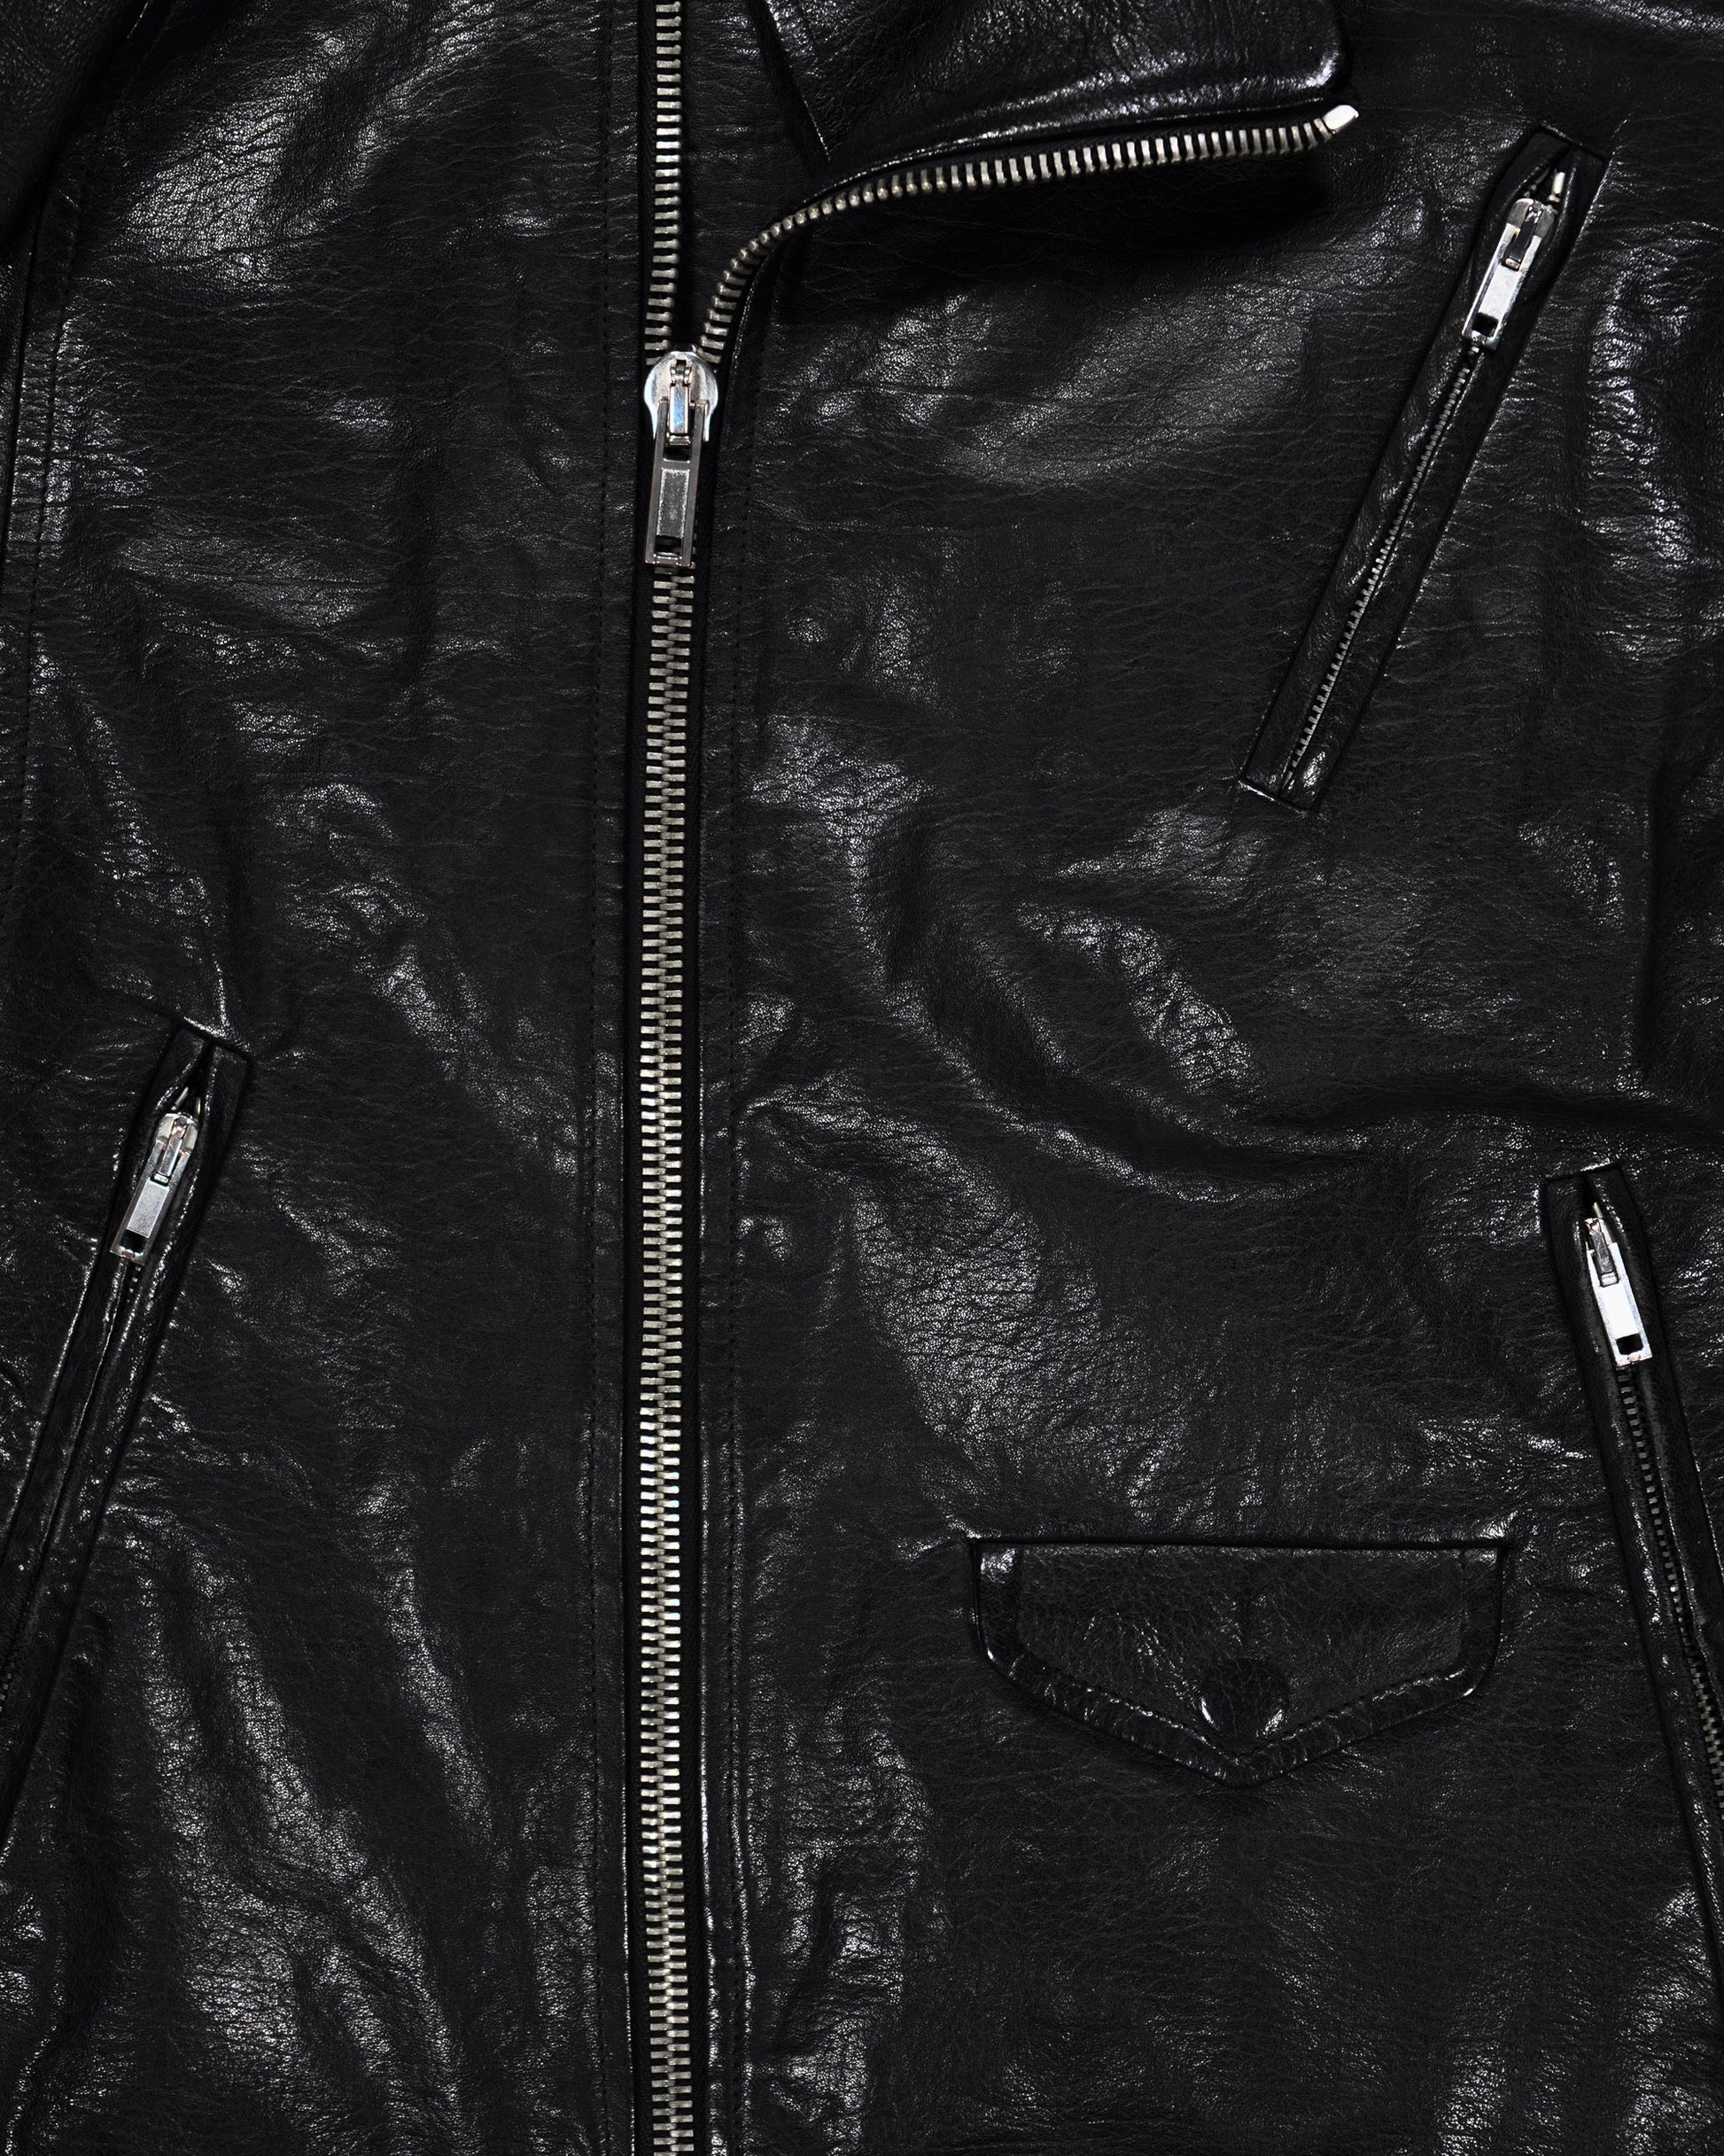 Rick Owens "Stooges" Leather Jacket - SS10 "Release"